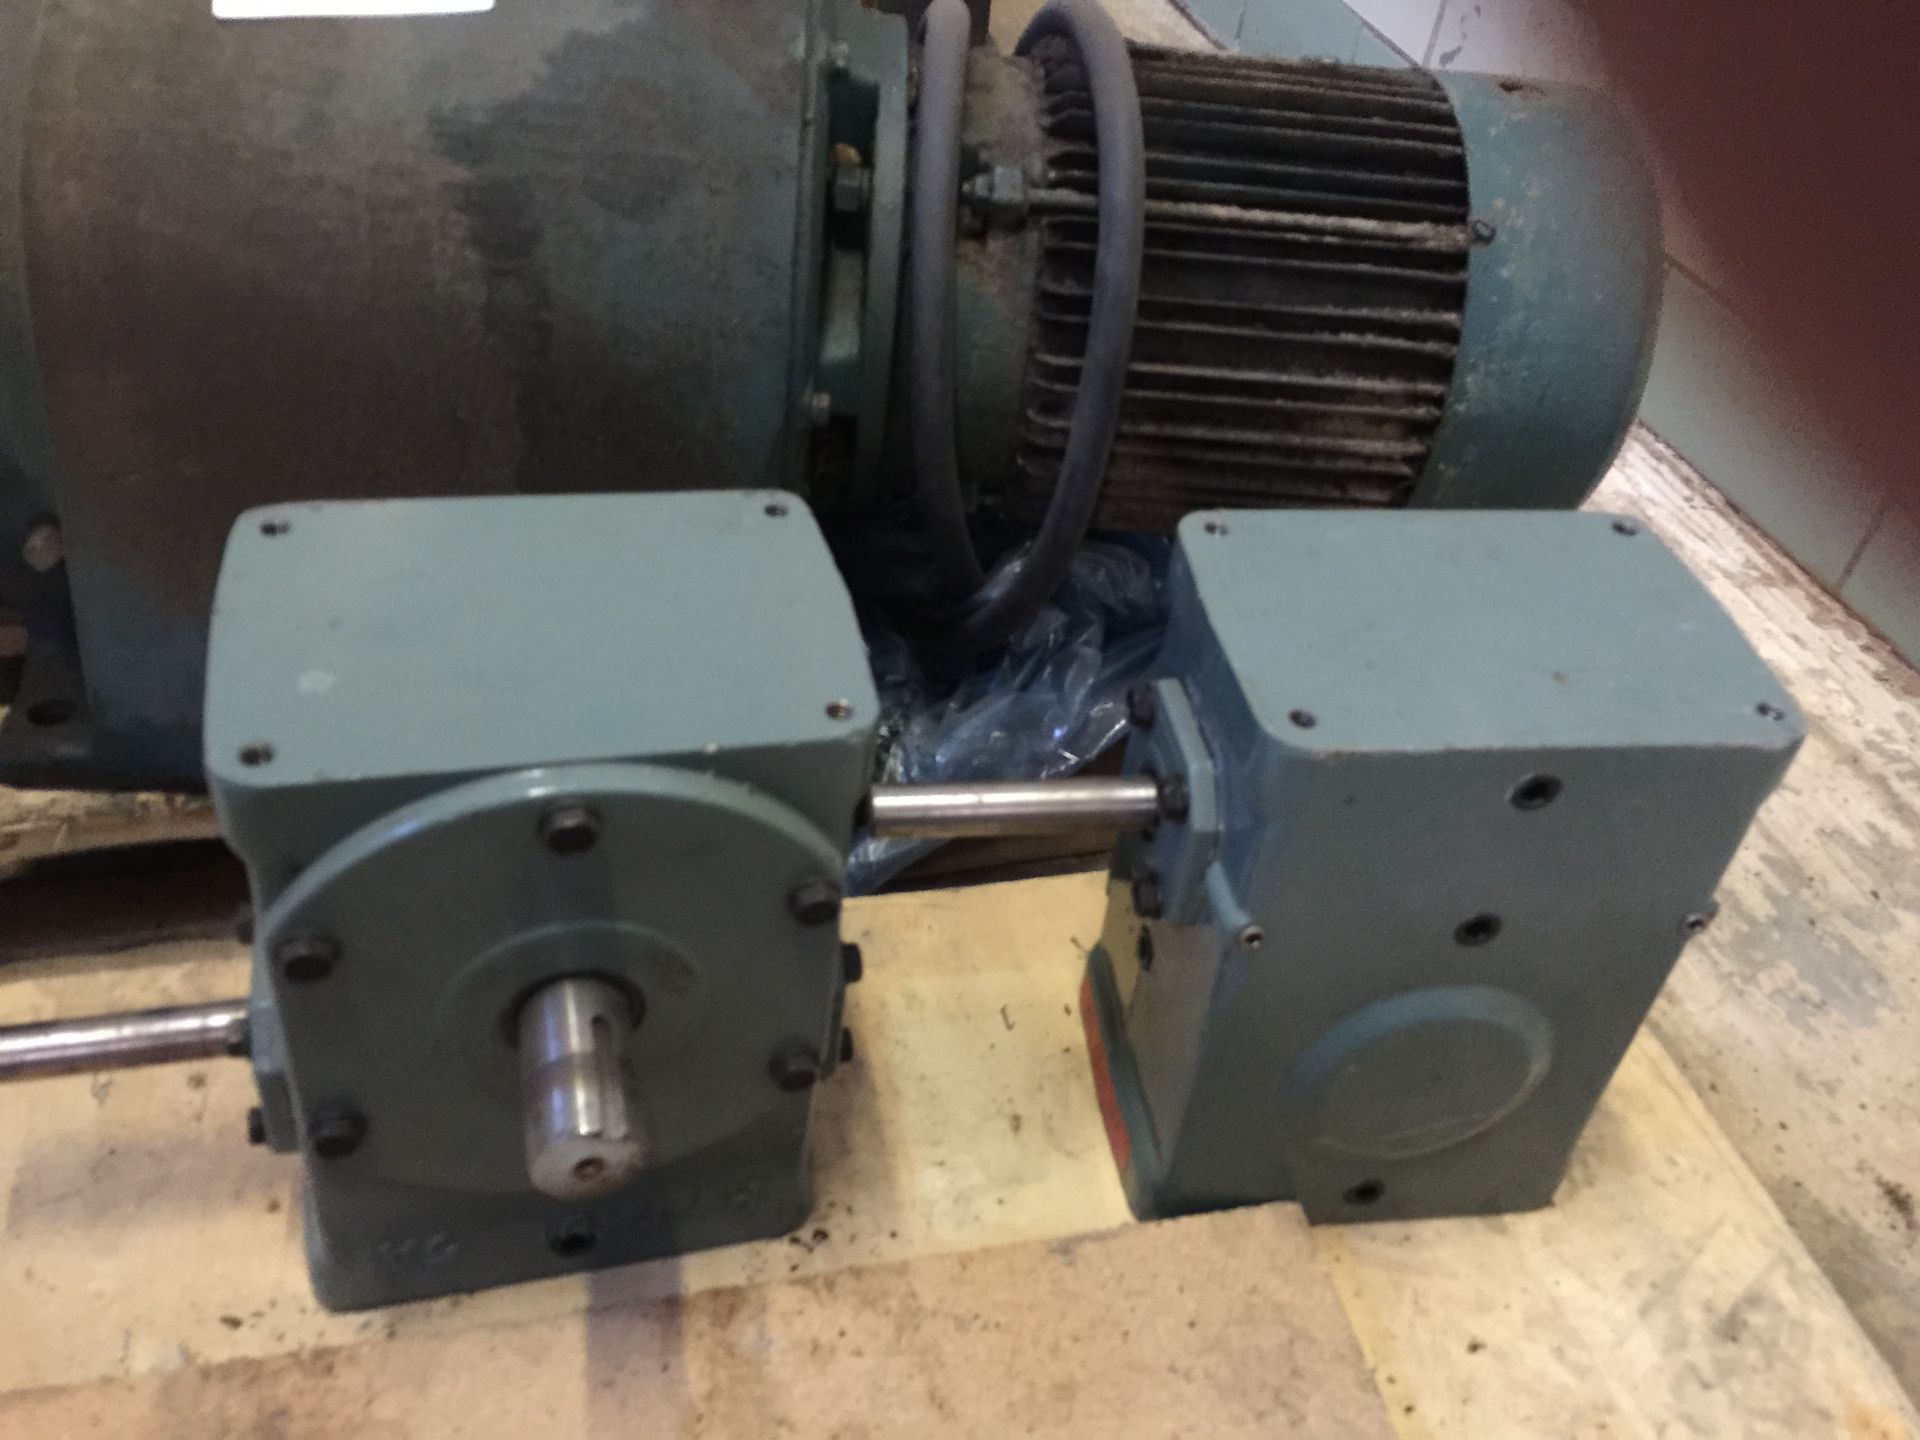 Lot of 4 gearboxes ***___   A Rigging Fee of _ $25 _ will be due the rigger   ___*** - Image 8 of 8